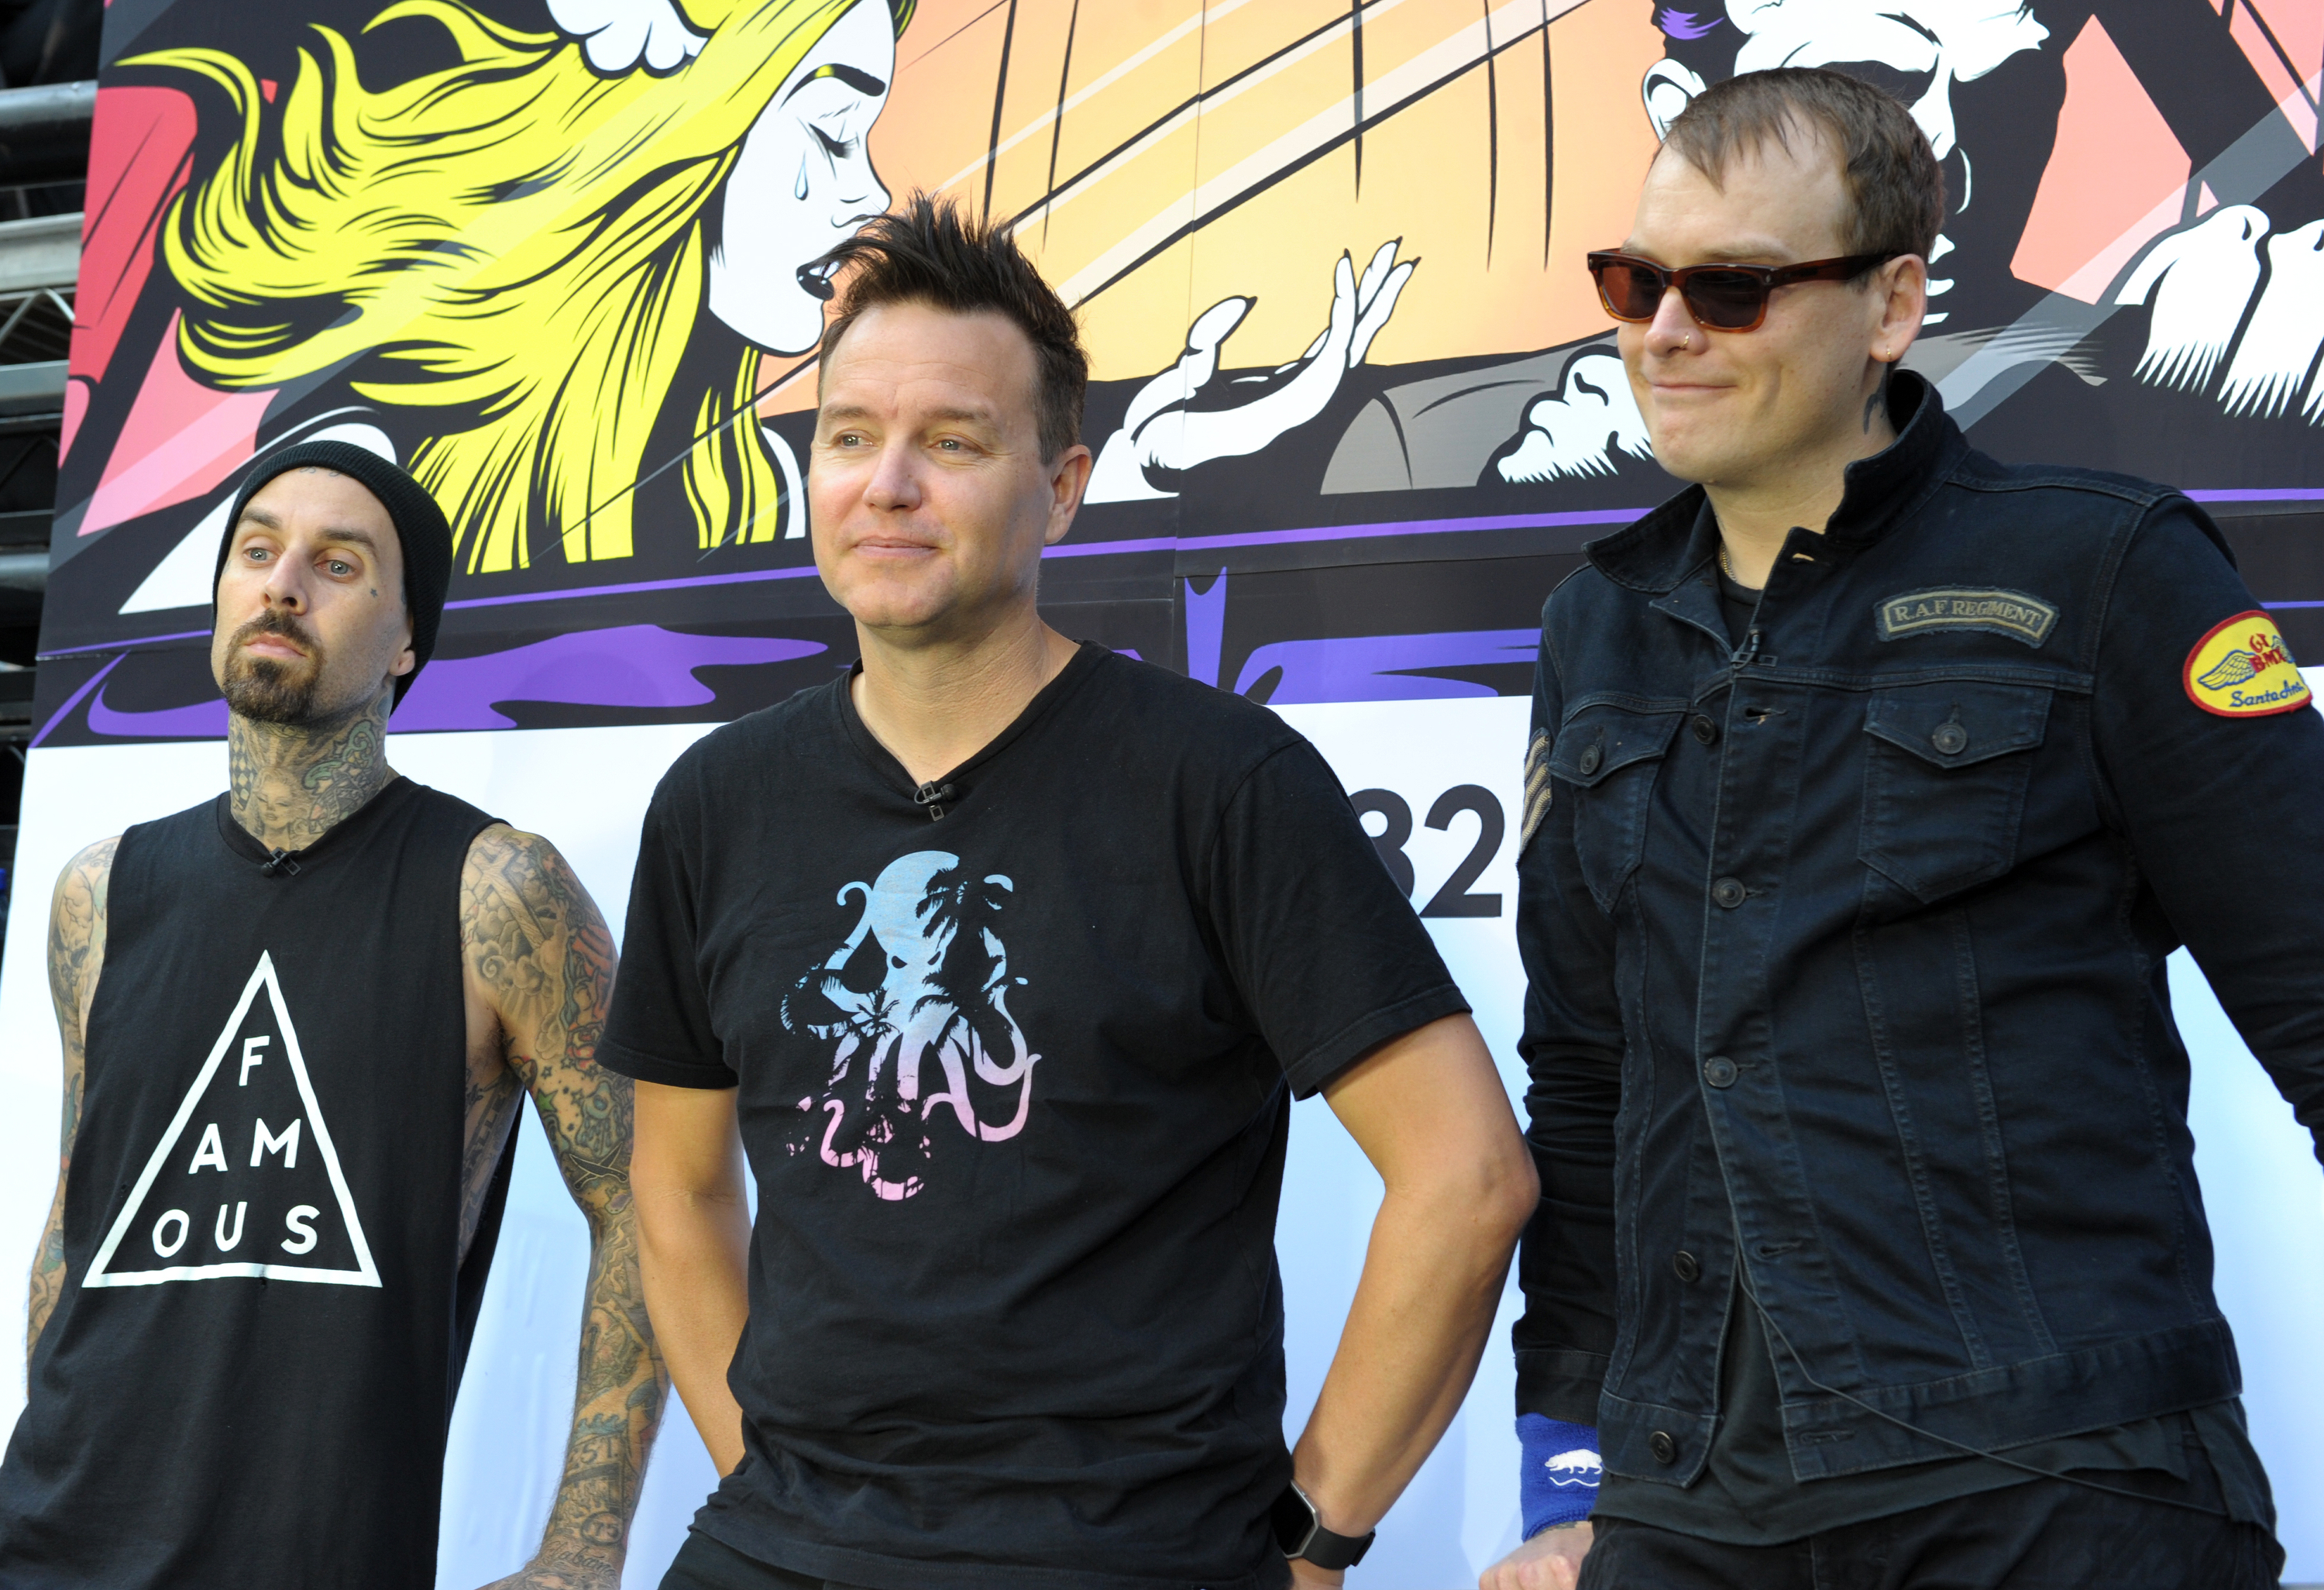 Blink-182: Mark Hoppus Has Different Views on Aliens | Time